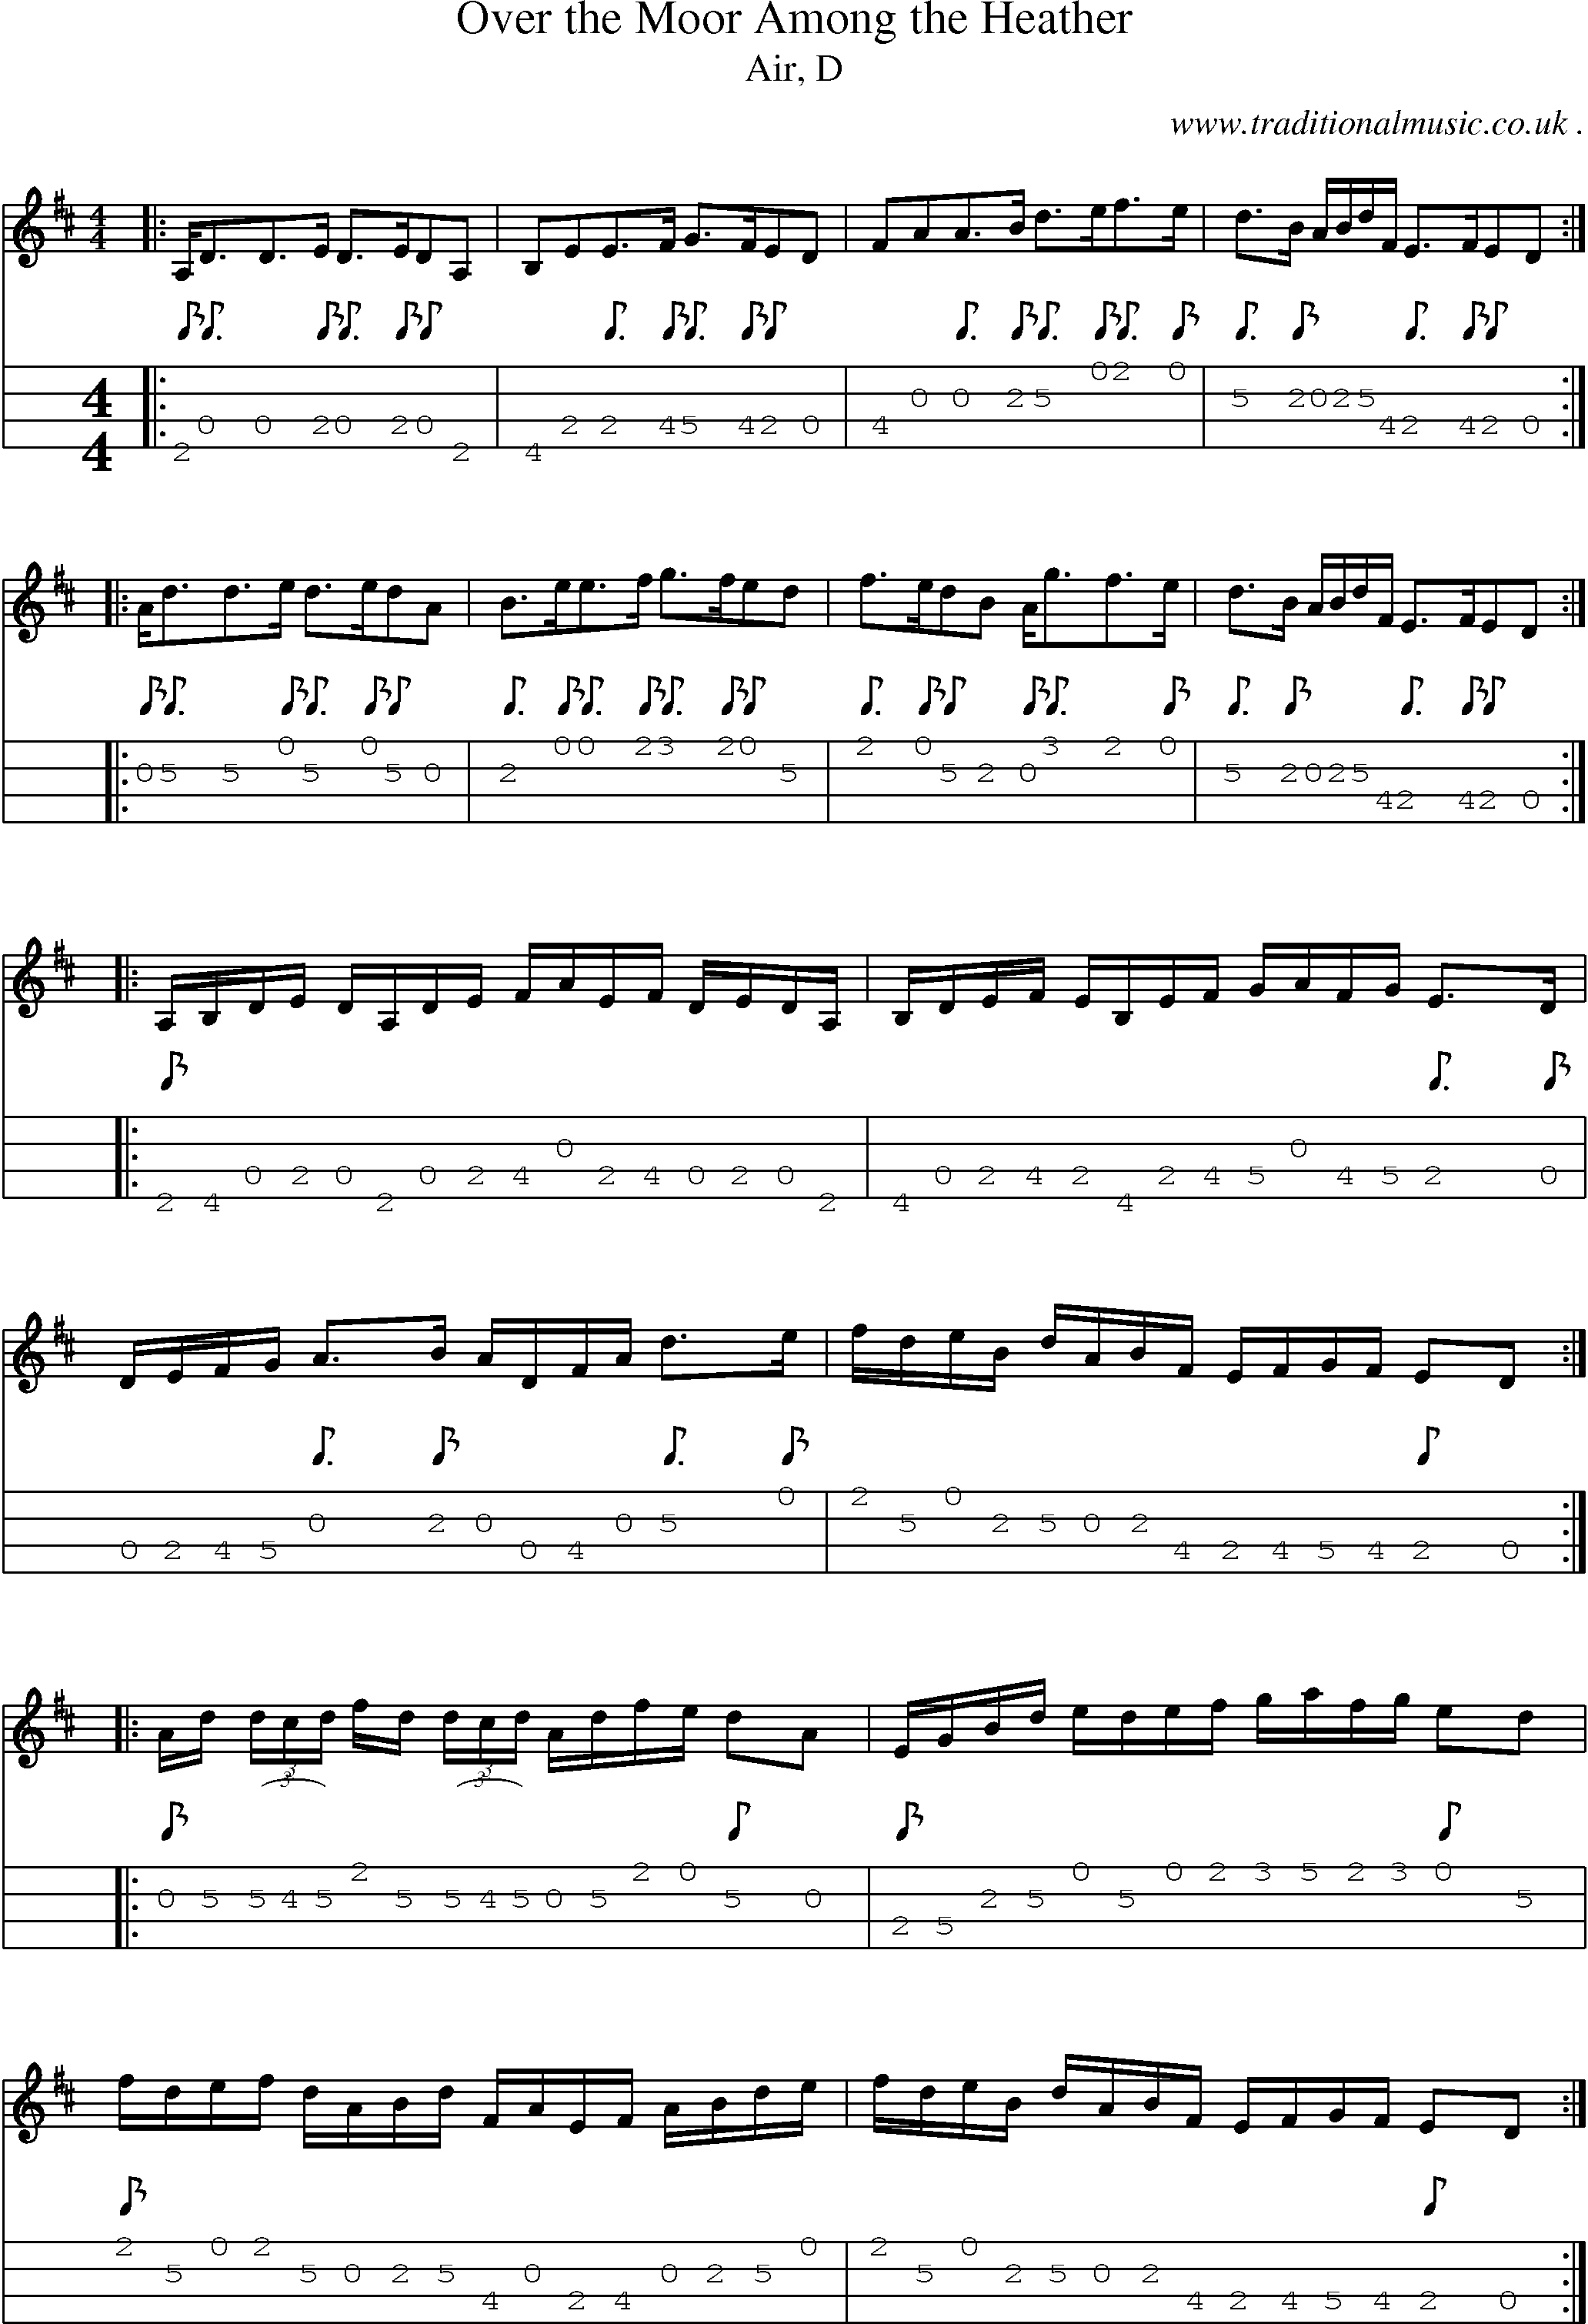 Sheet-music  score, Chords and Mandolin Tabs for Over The Moor Among The Heather